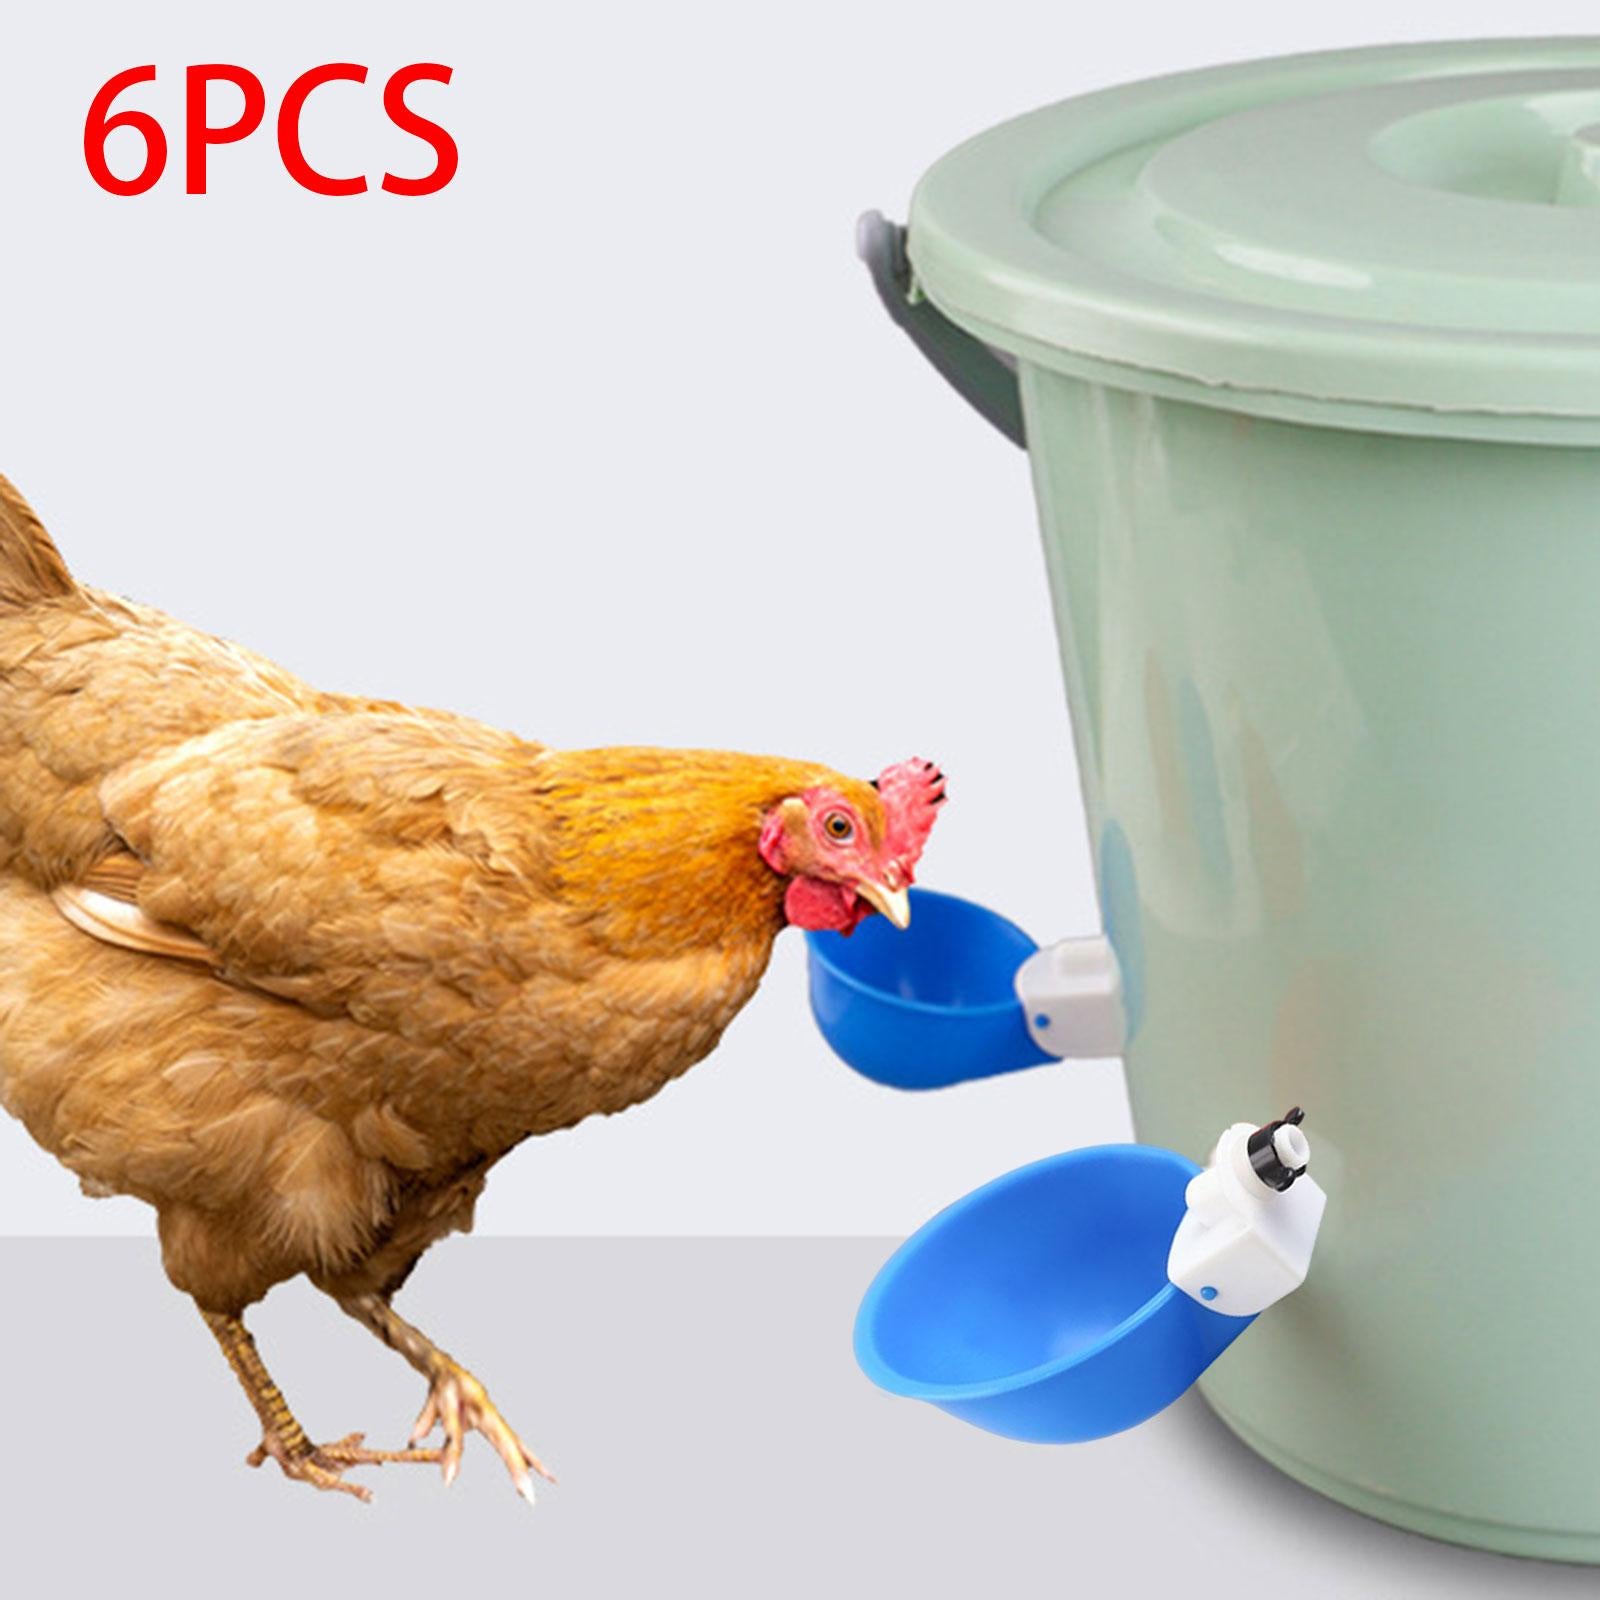 6Pcs Chicken Feeders Chicken Watering Cup Chicken Waterer for Birds Quail Blue